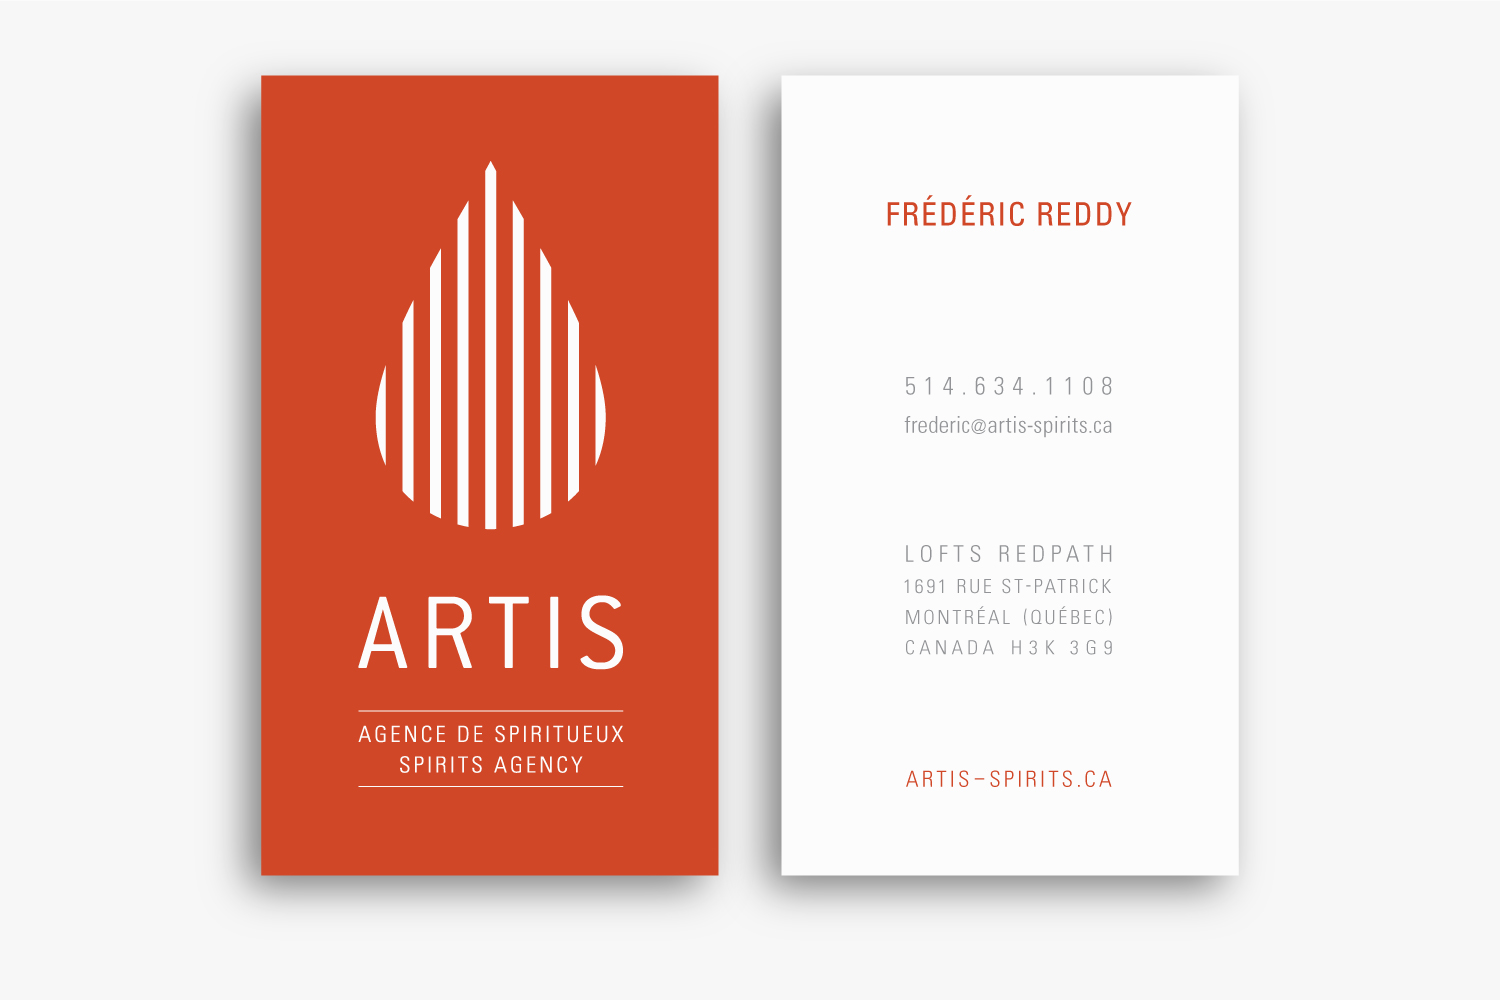 ARTIS – Spirits Agency – Identity & Stationery by Isabelle Robida – Infrarouge [Design & Culture] – 2015 – infrarouge.ca